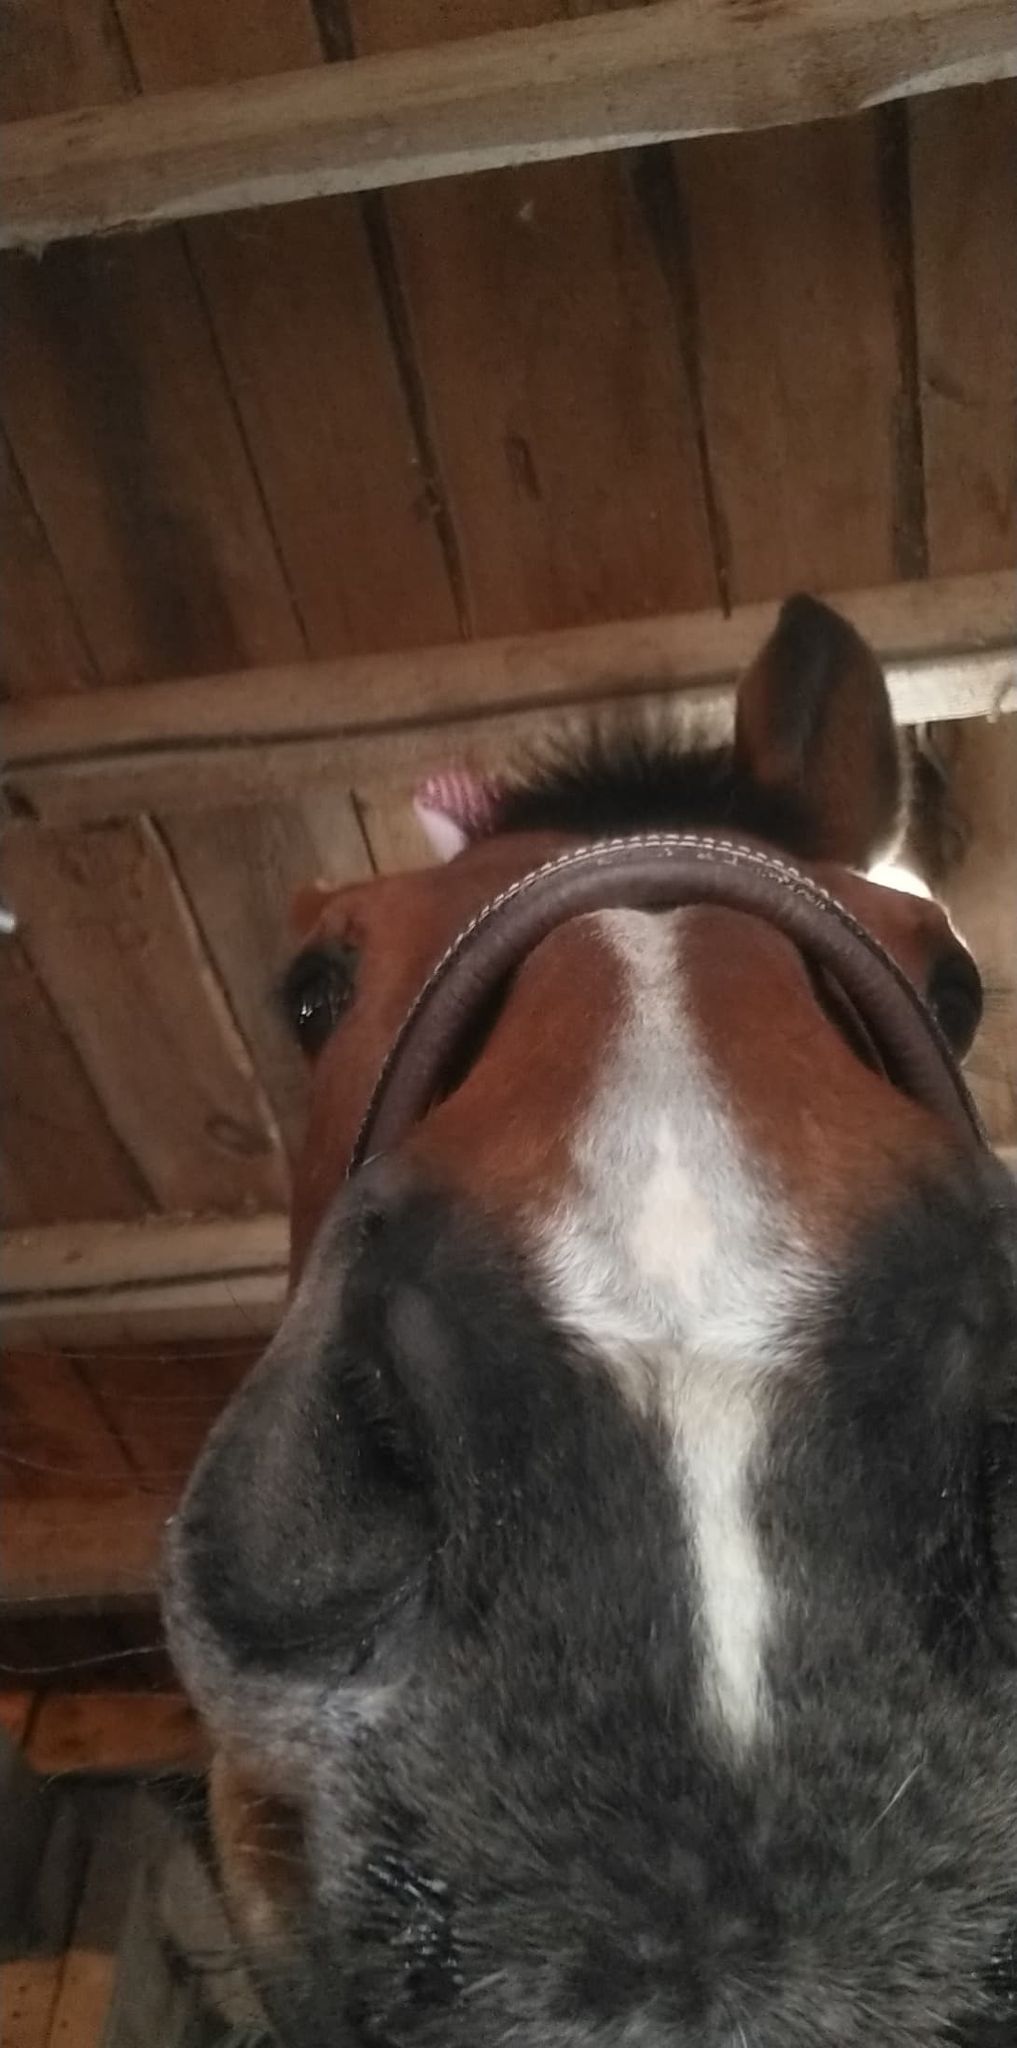 Closeup of horses nose as it is inspecting the camera